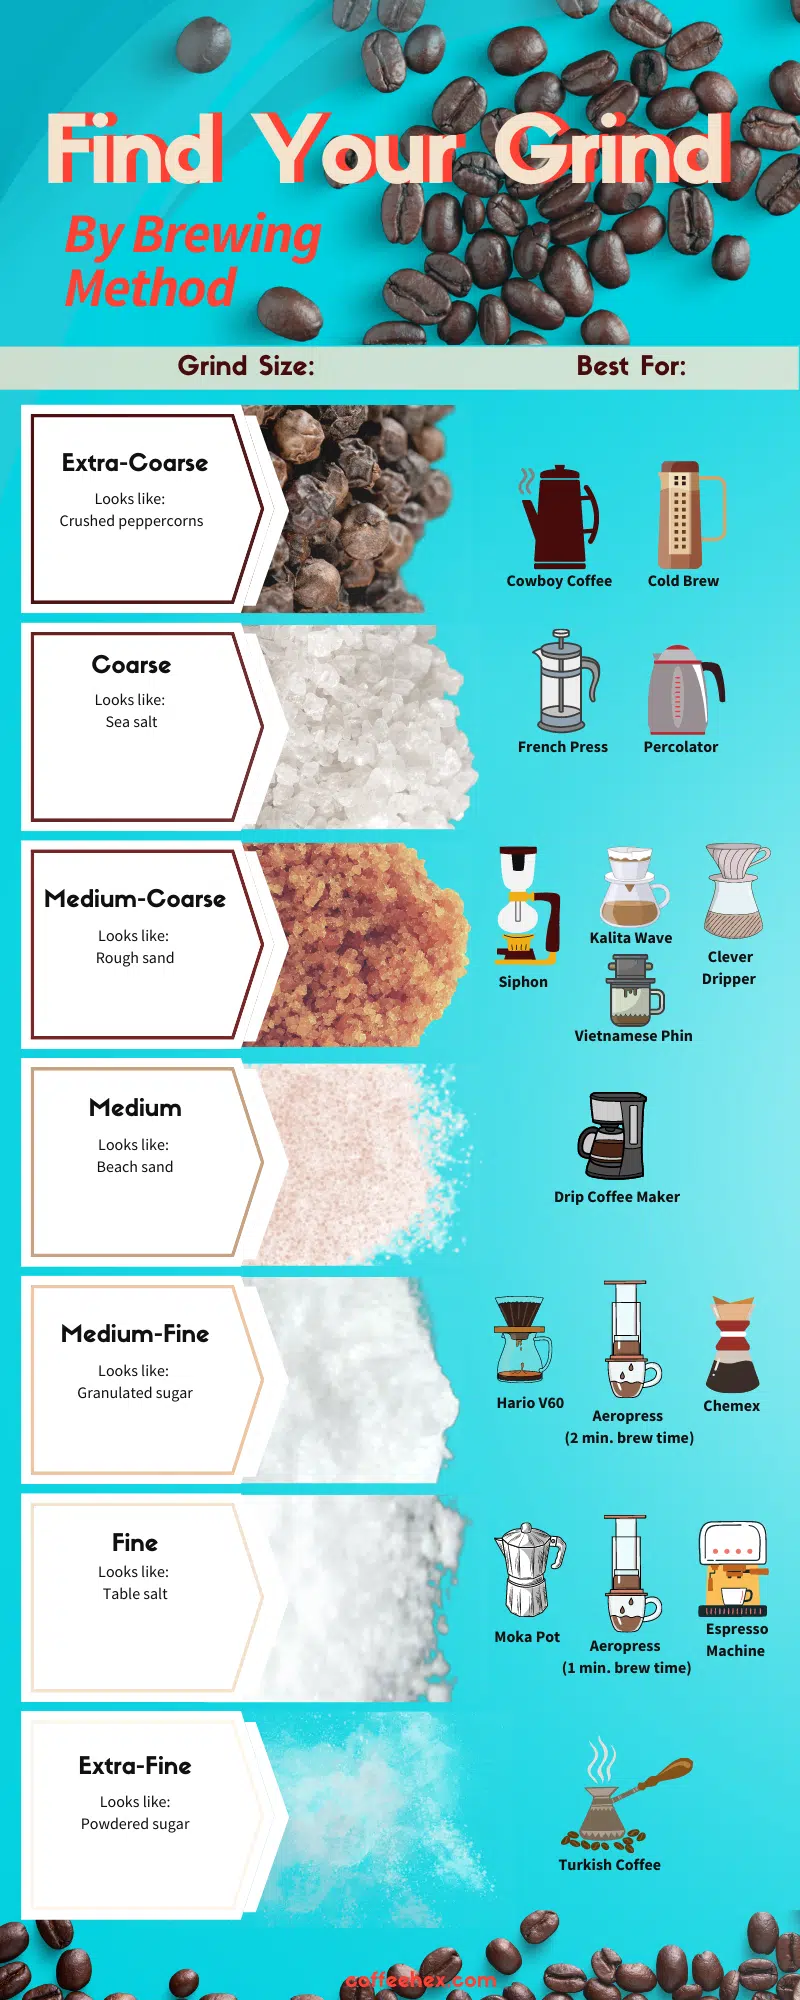 Coffee Grind Size Chart: Find the Answers Here!